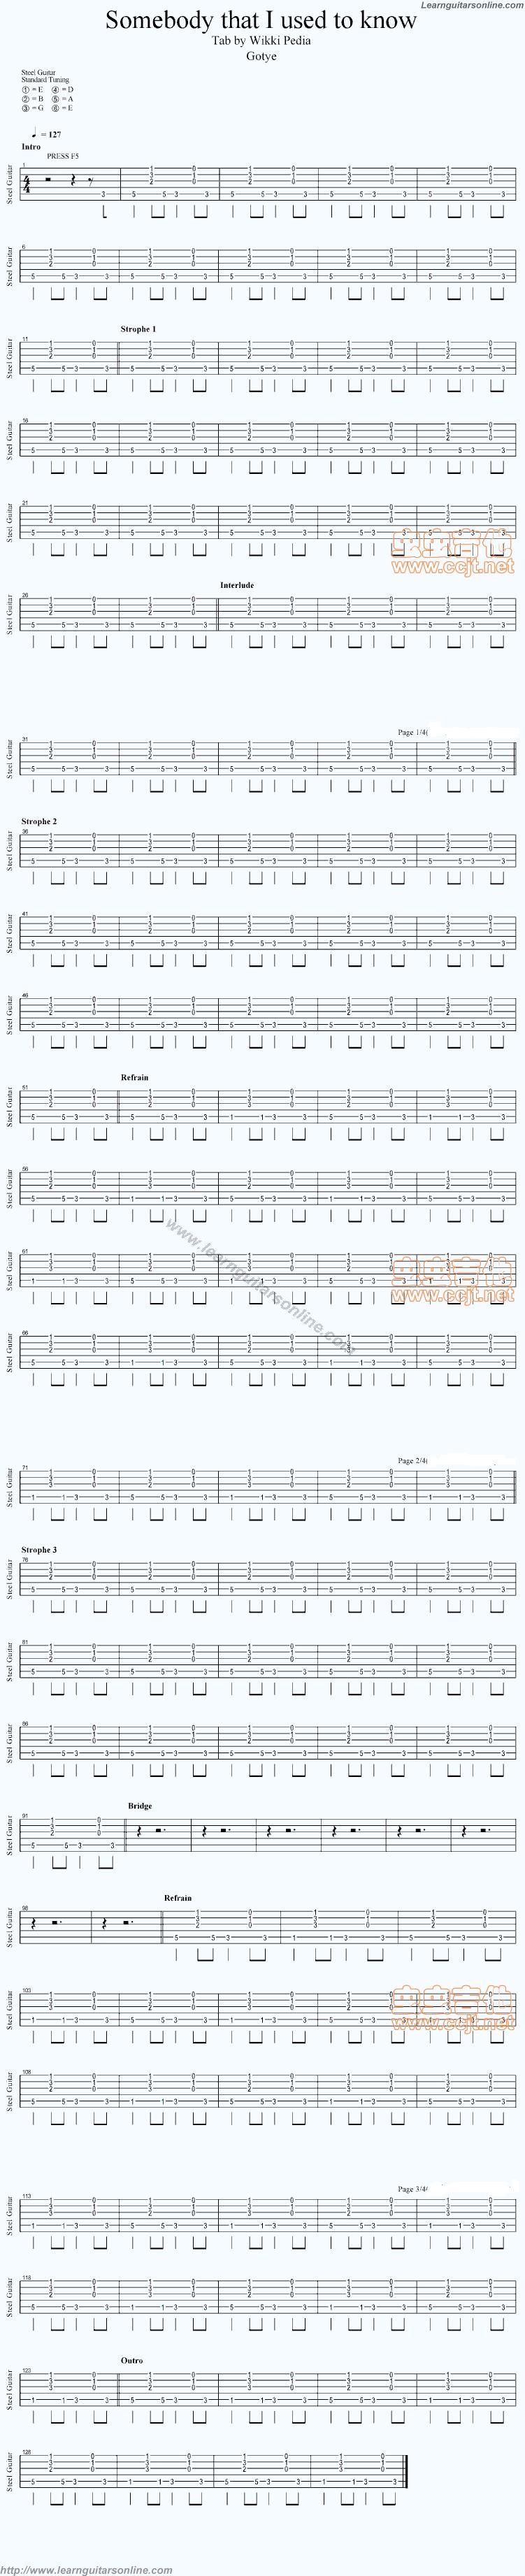 Somebody That I Used To Know by Gotye Feat Kimbra Guitar Sheet Music Free